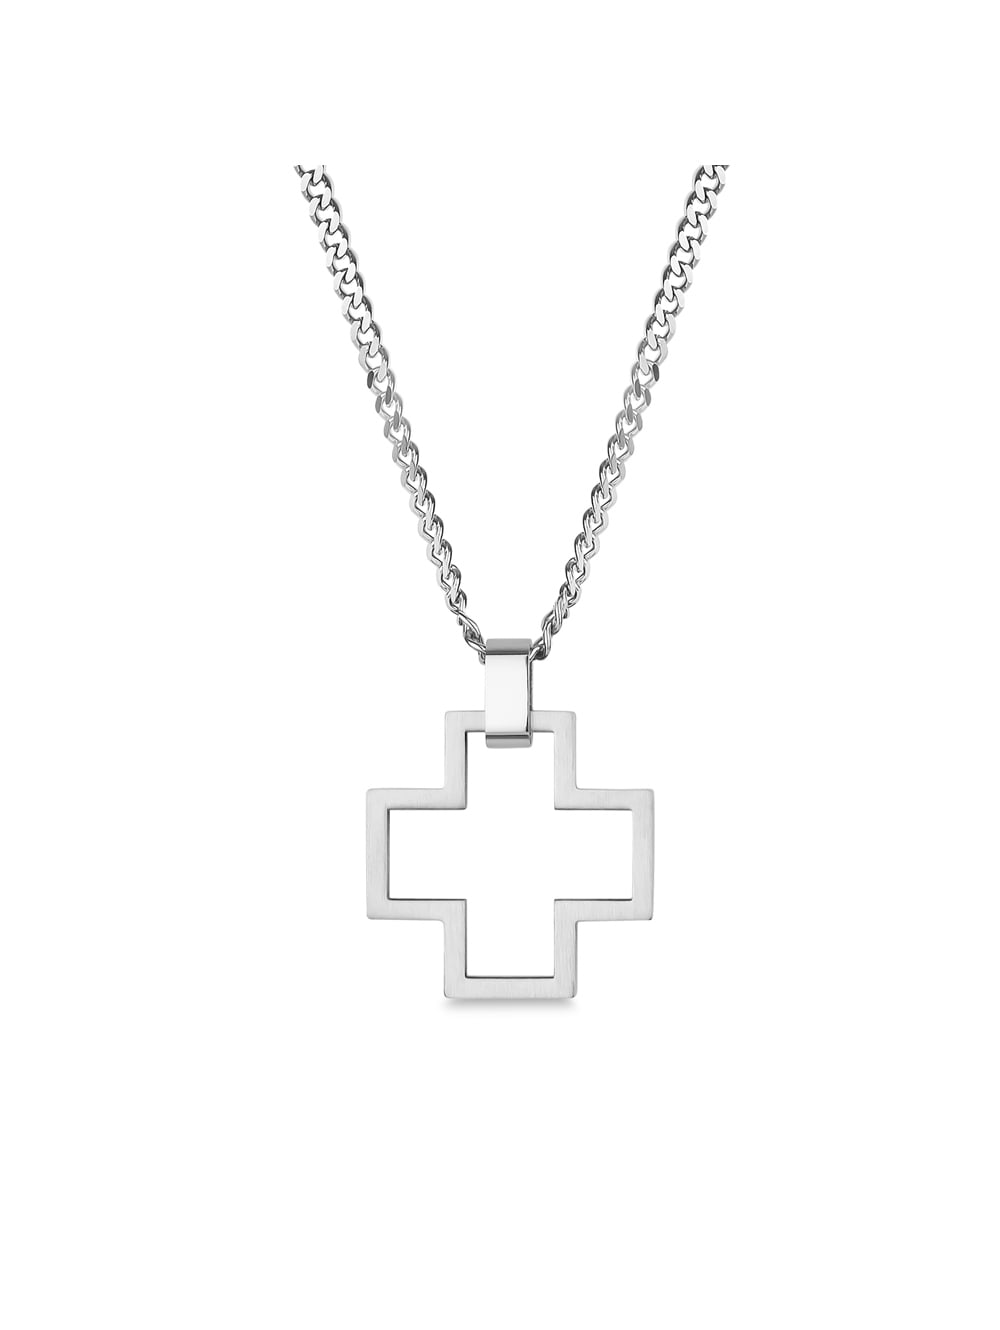 316L Stainless Steel Silver Gold Dragon Cross Pendant Necklace & Designer Chain 